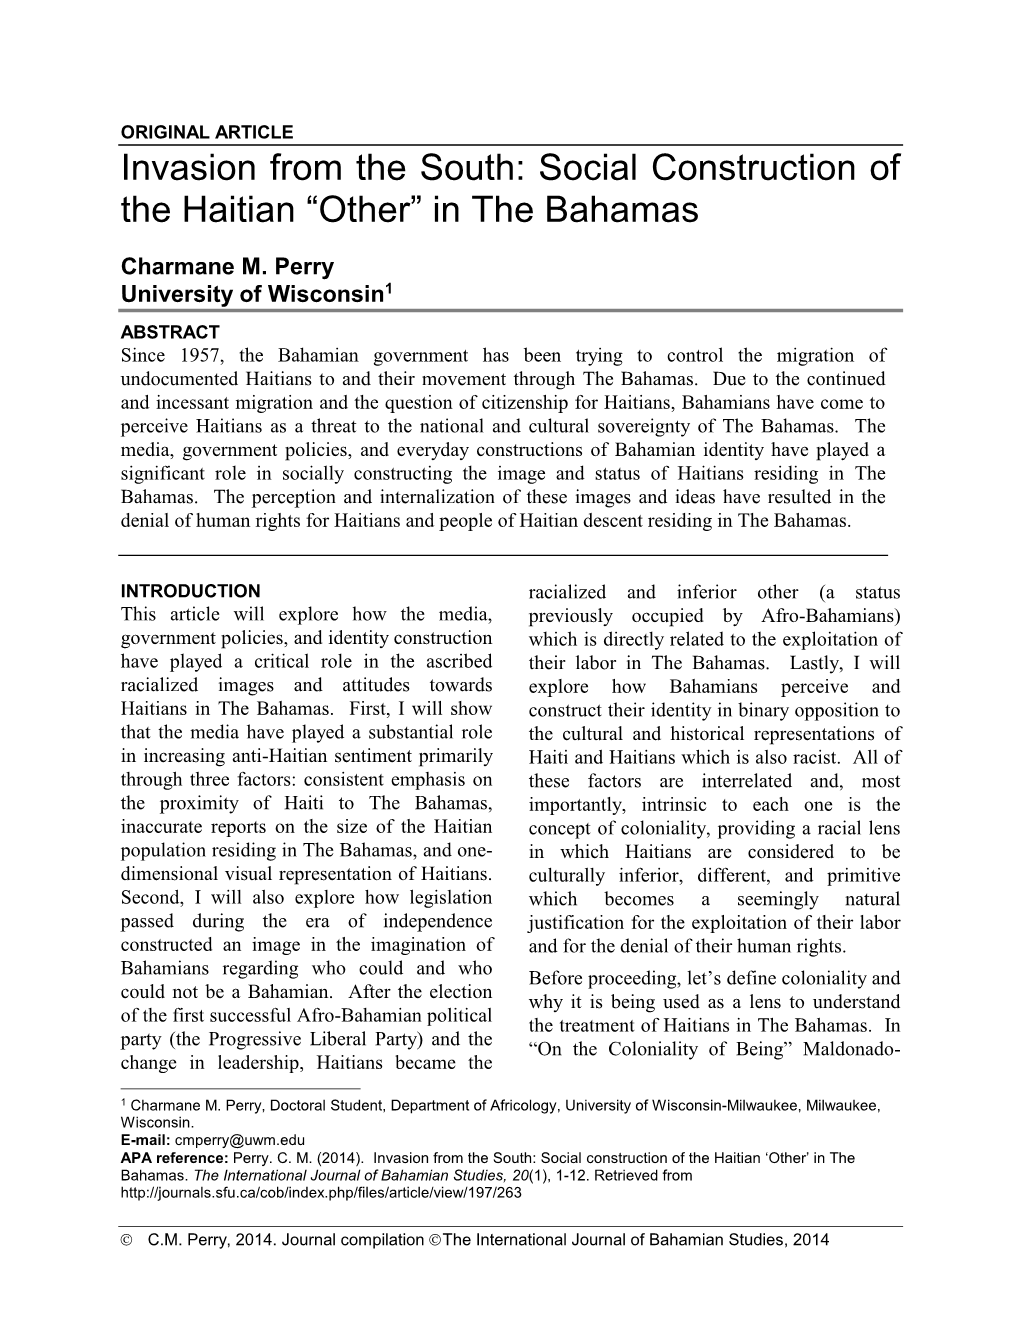 Social Construction of the Haitian "Other" in the Bahamas